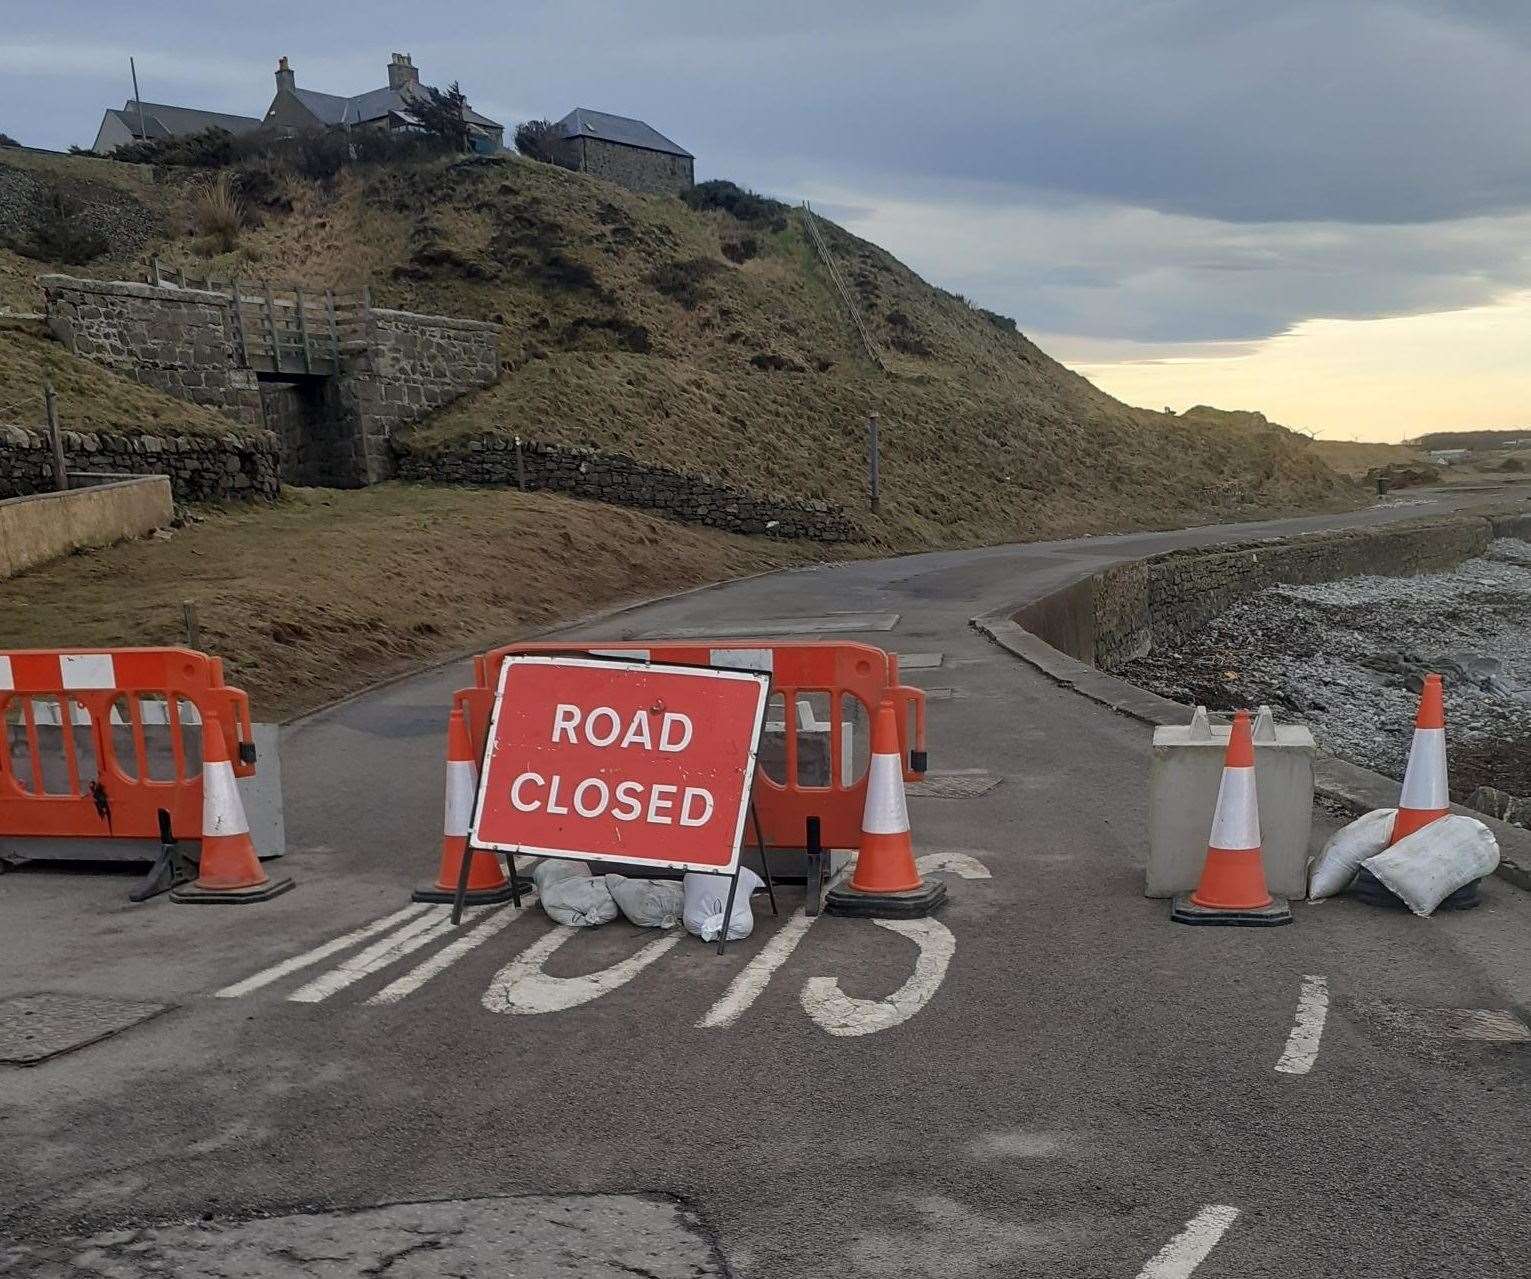 The road will be closed for a further 11 weeks from the start of February.